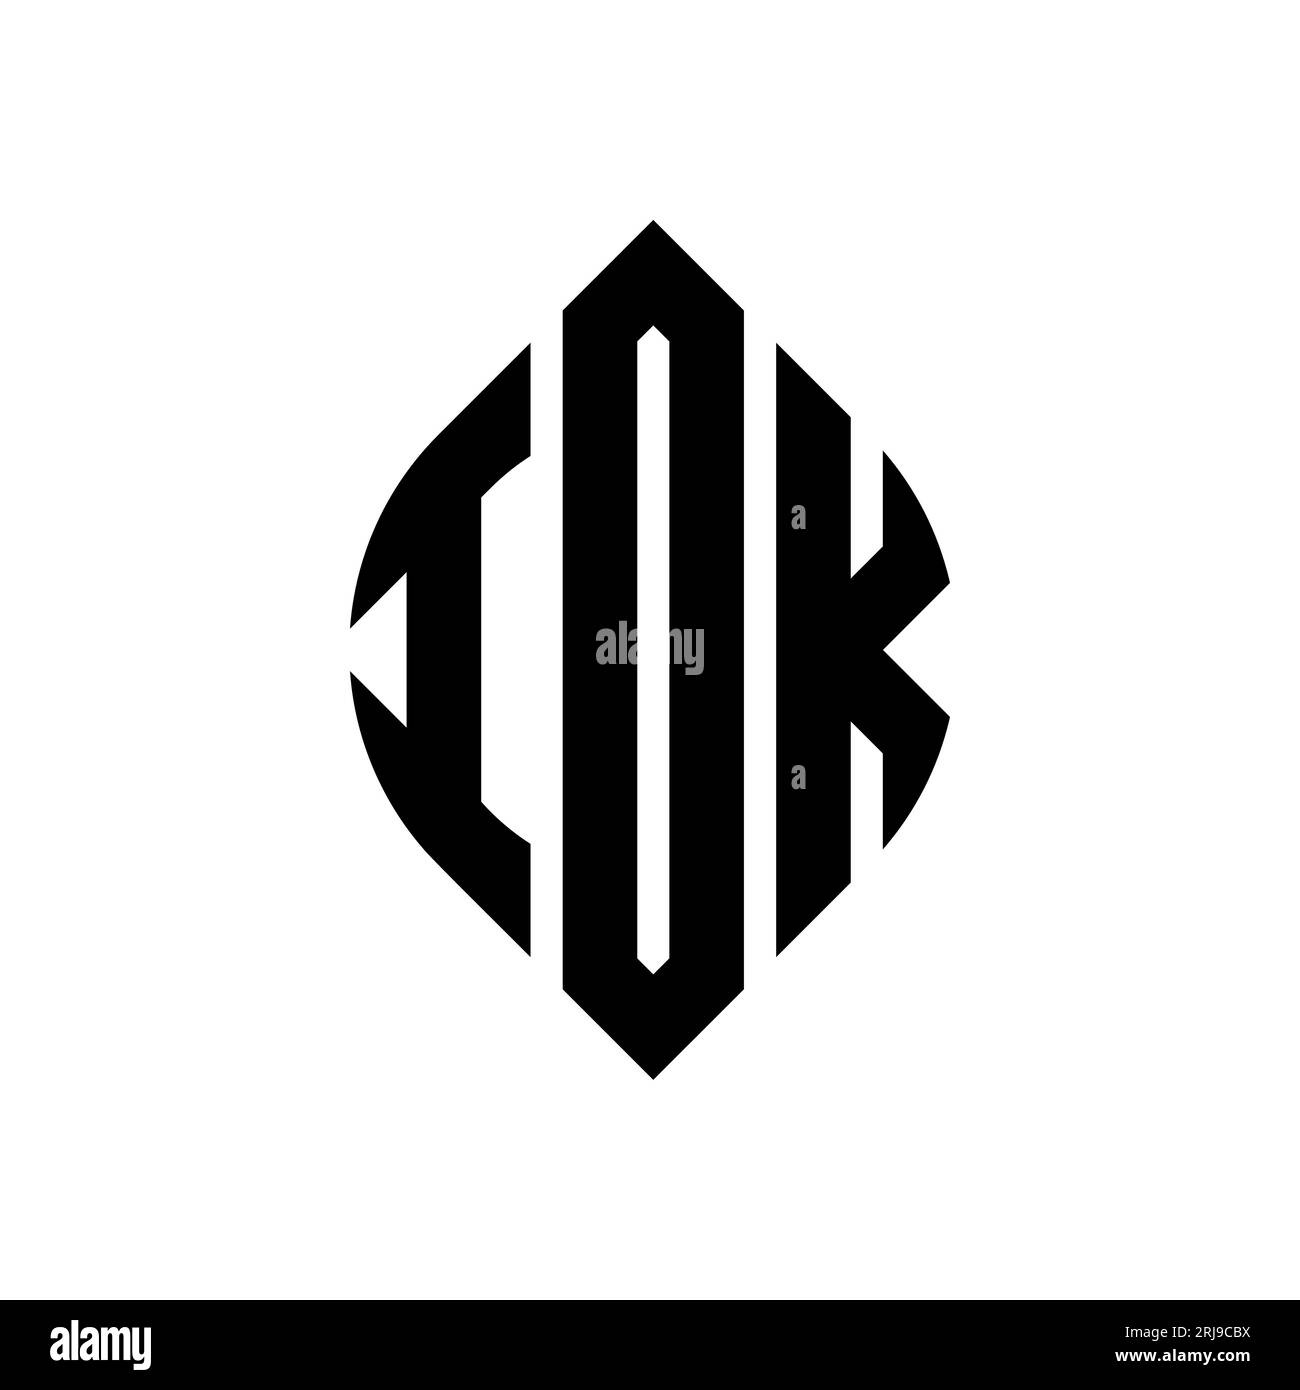 IOK circle letter logo design with circle and ellipse shape. IOK ellipse letters with typographic style. The three initials form a circle logo. IOK Ci Stock Vector